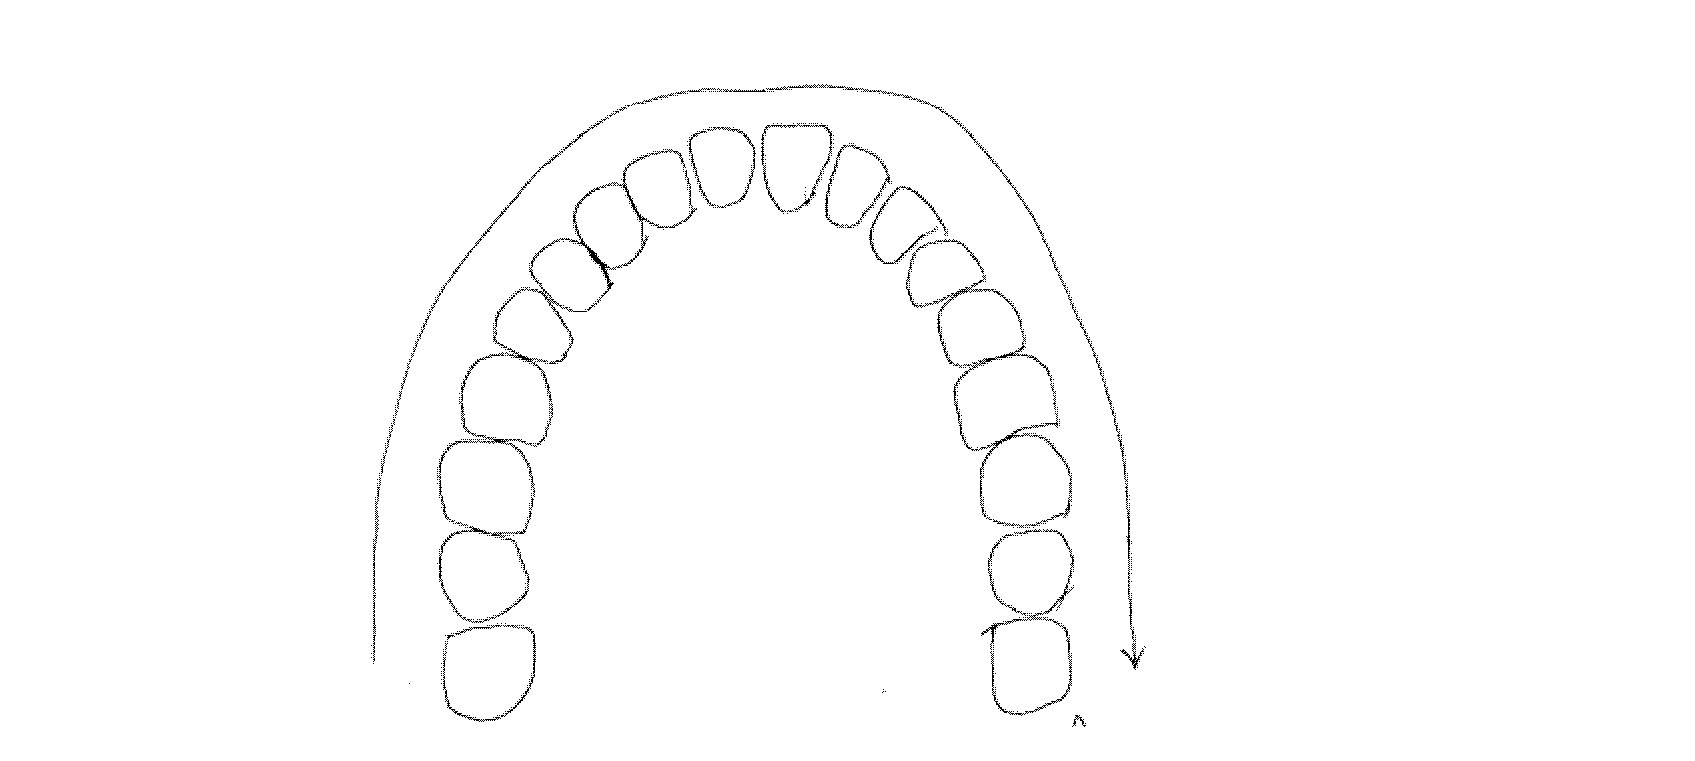 Data processing method of panoramagram generated by dental CBCT (cone beam computed tomography)